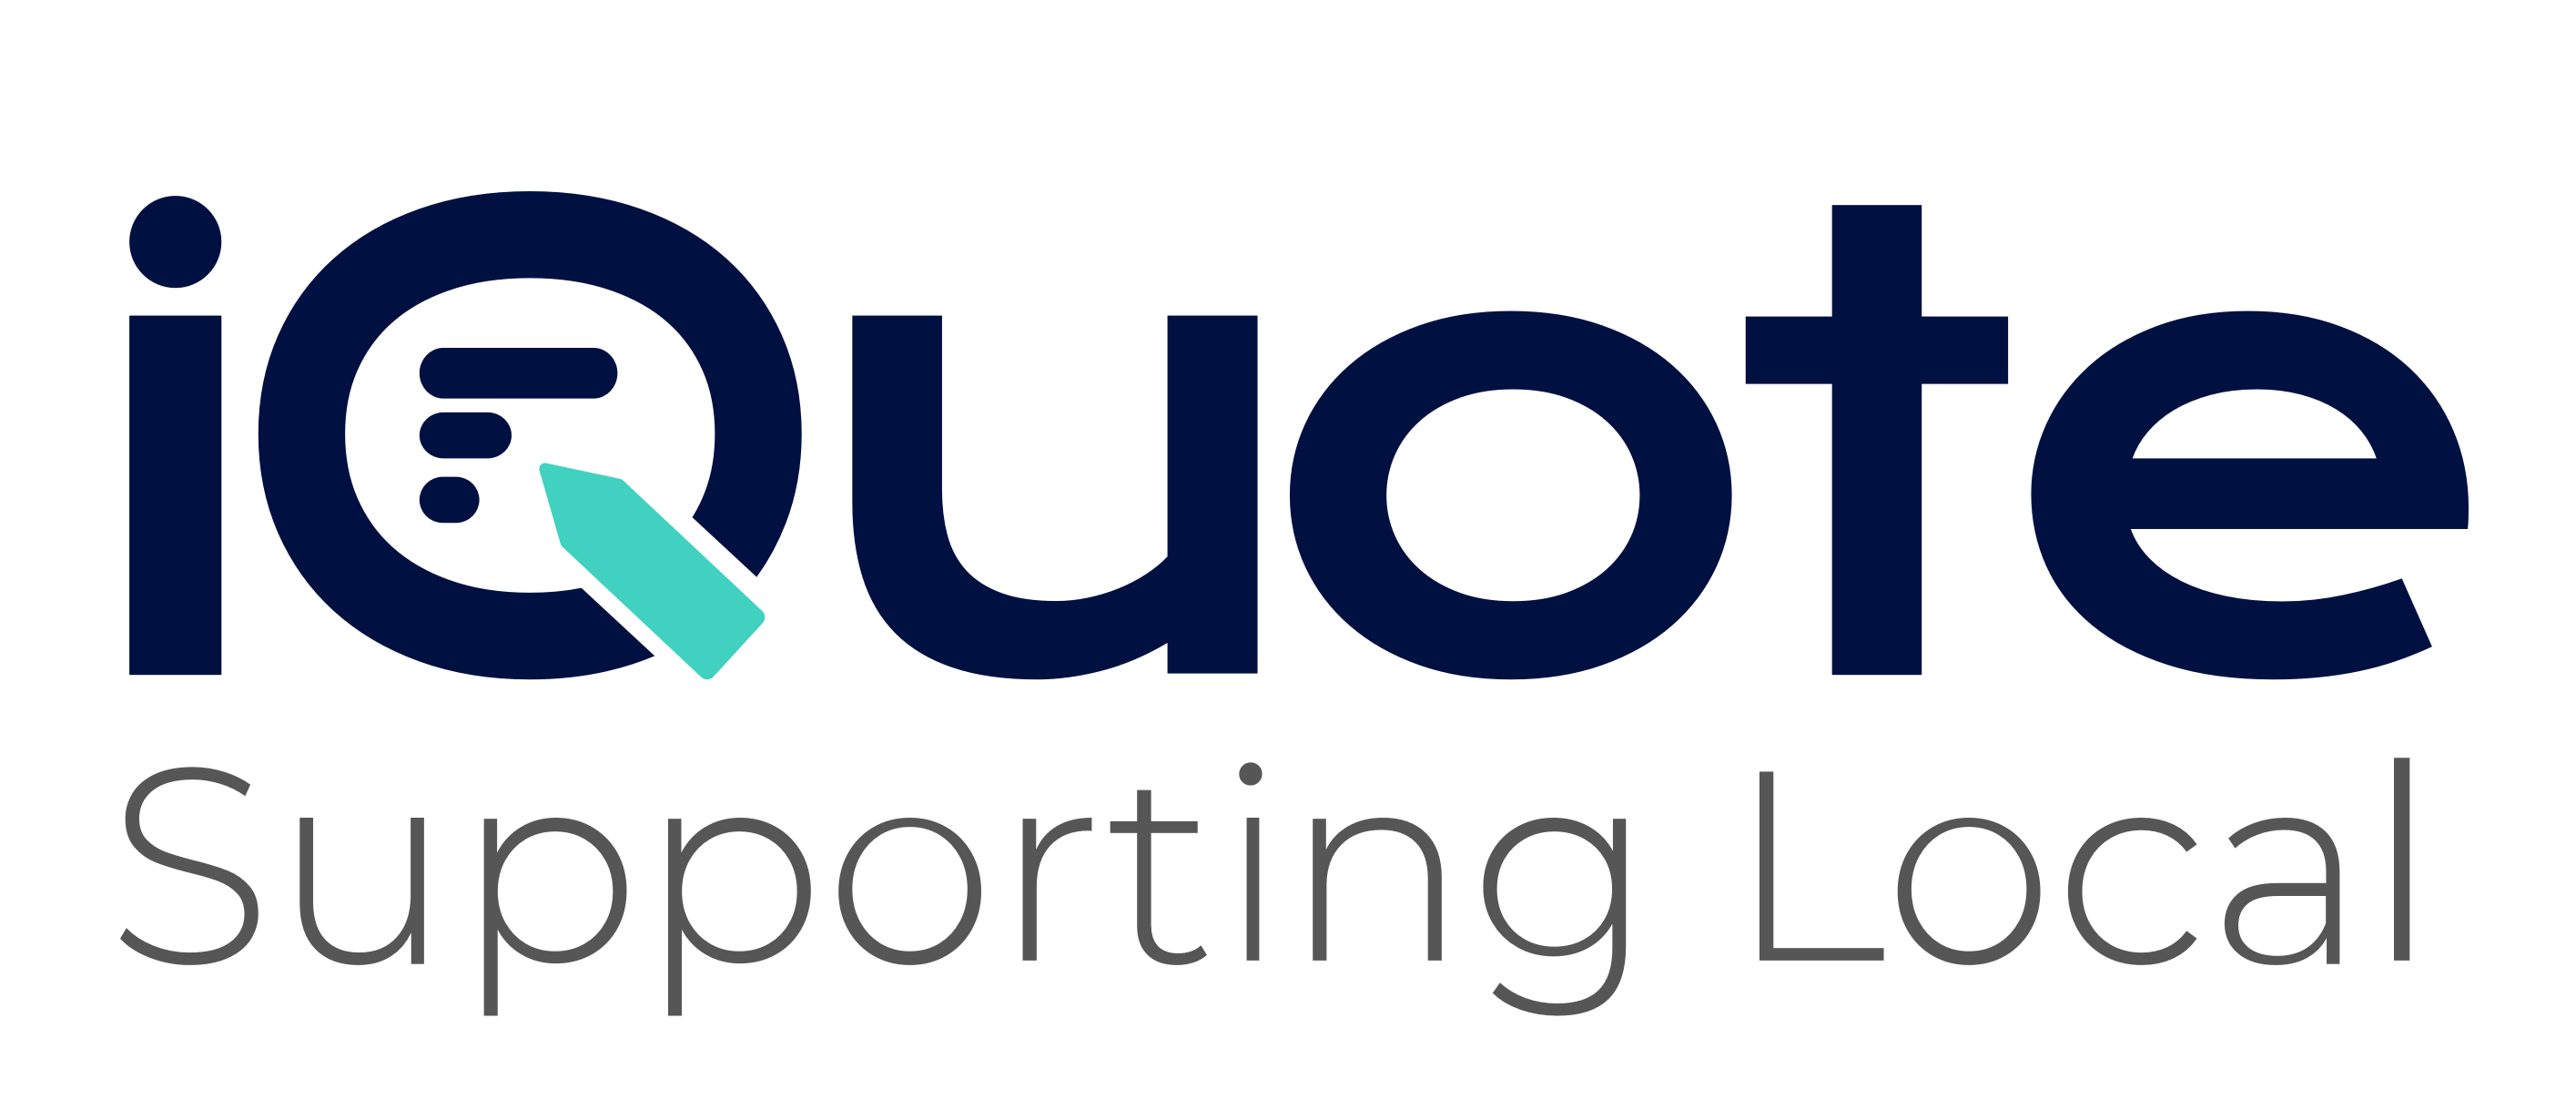 Iquote logo trimmed